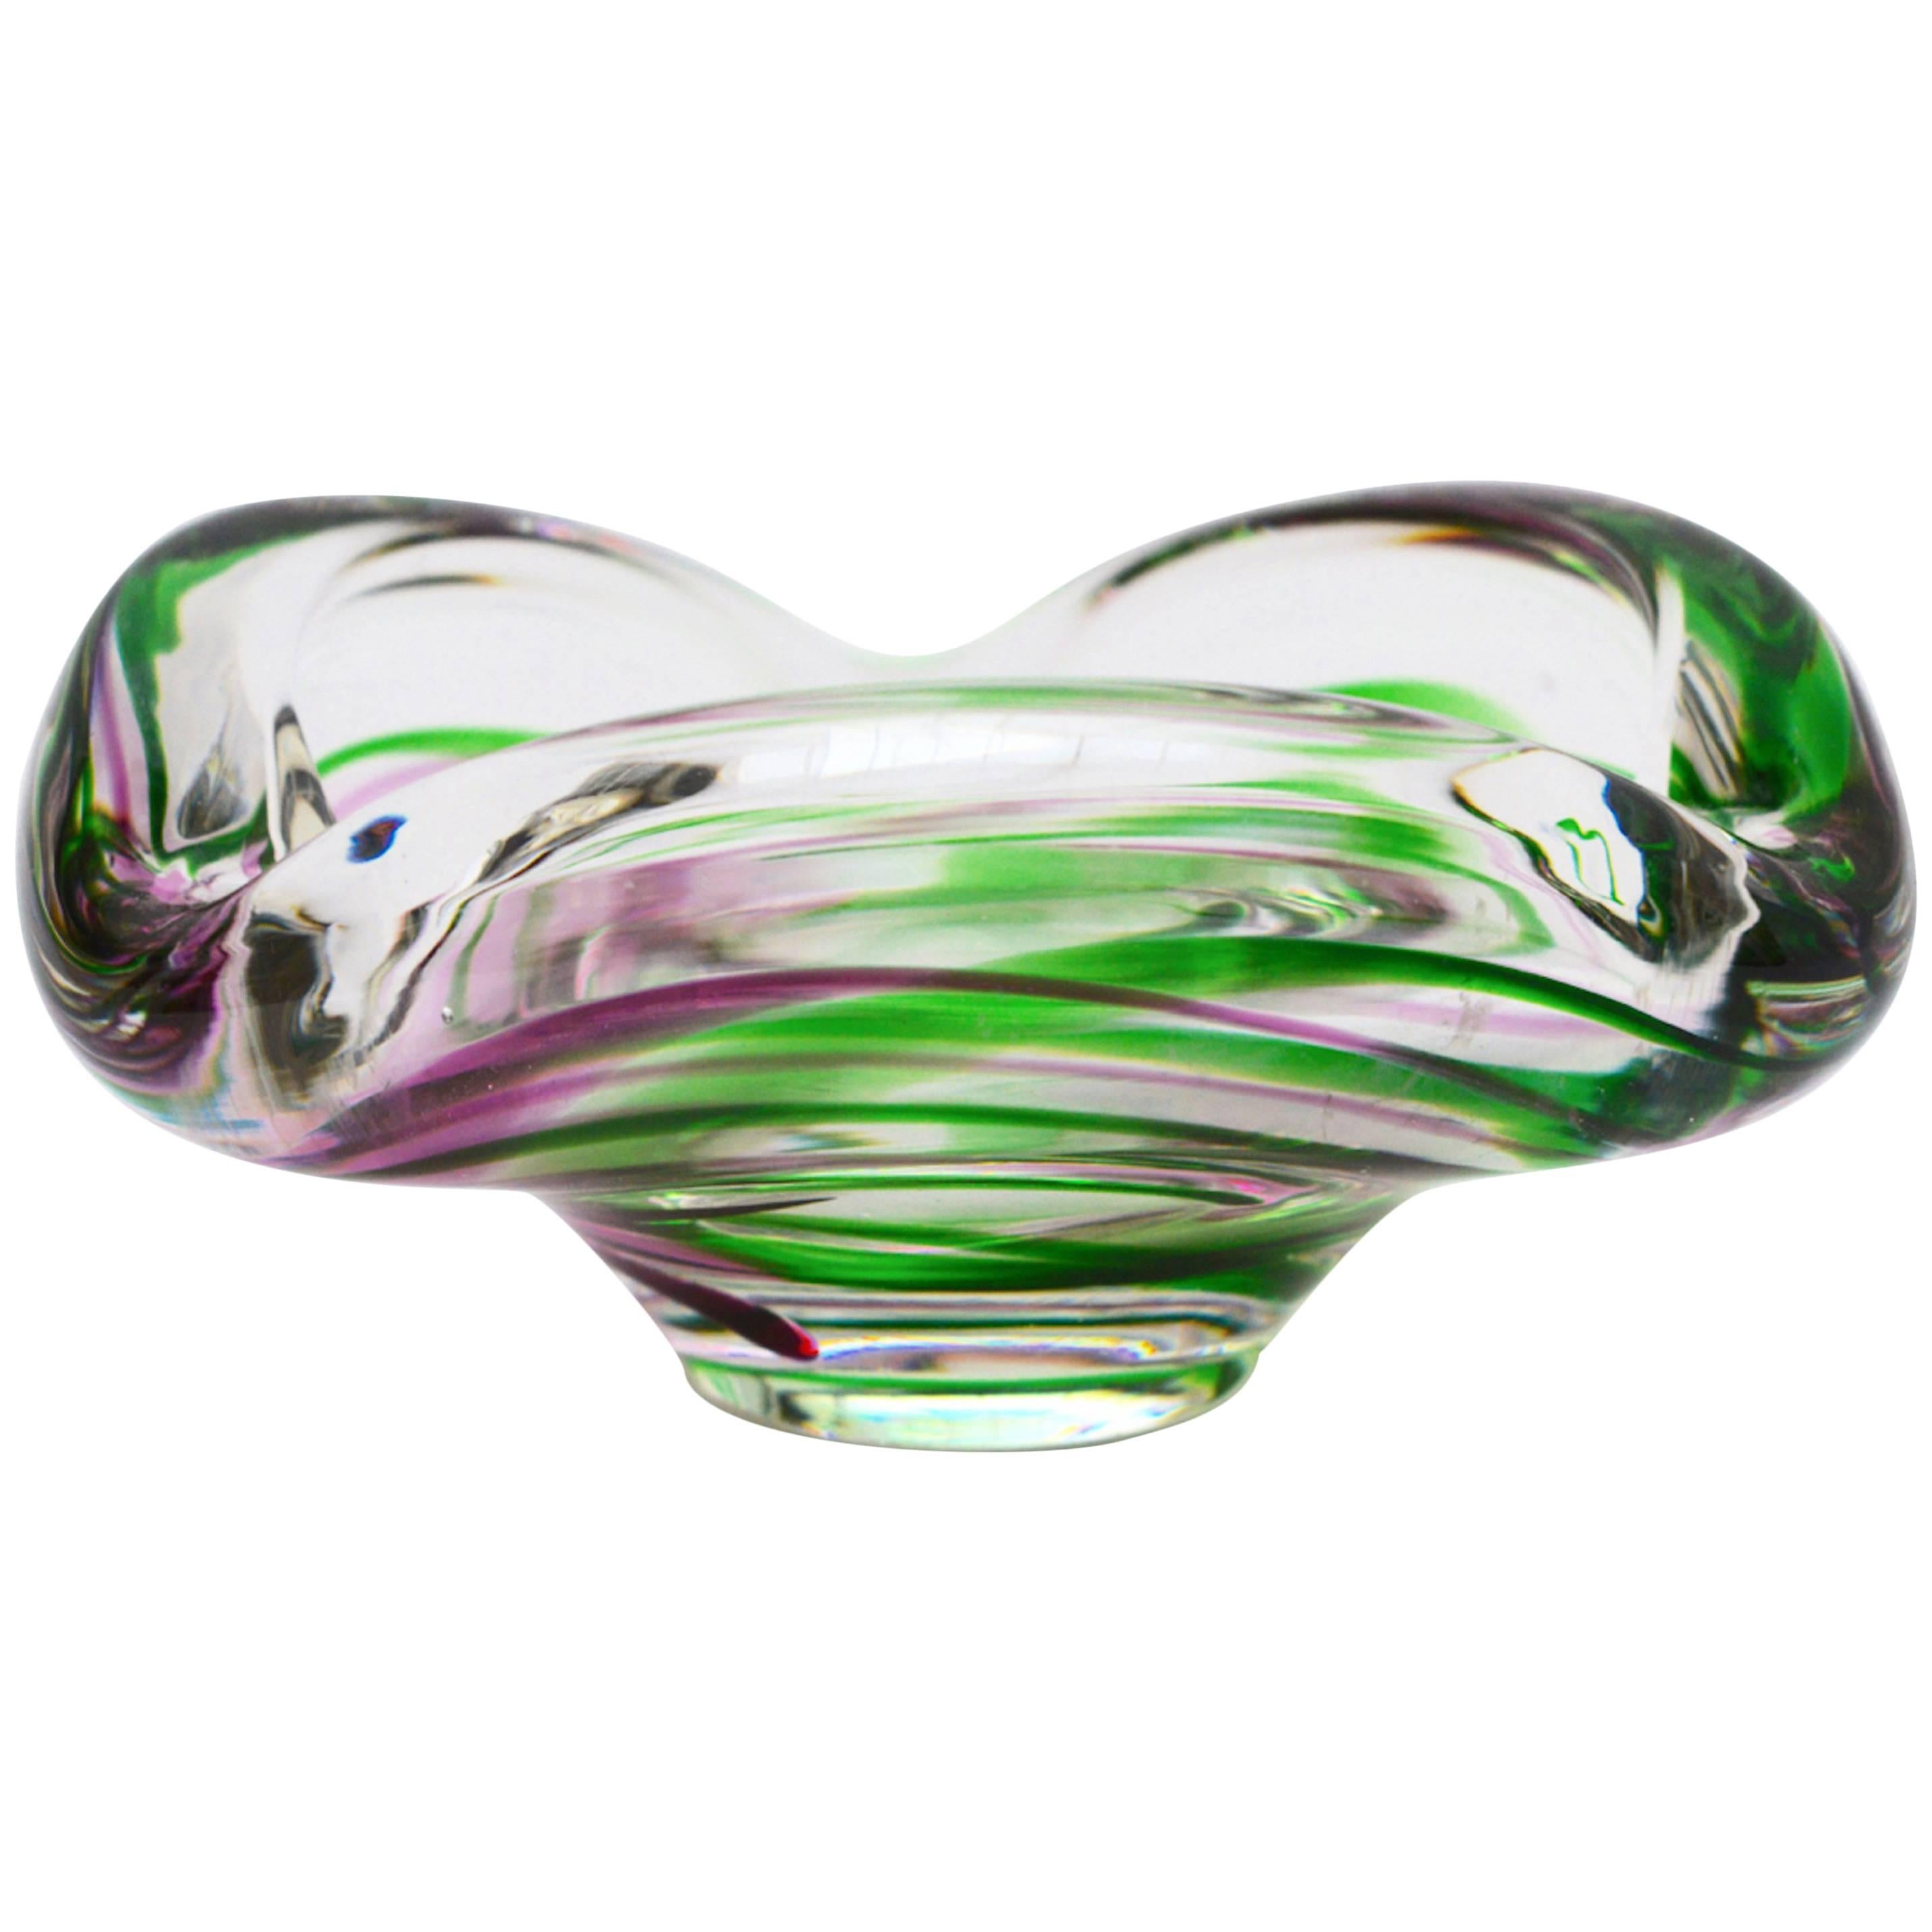 Mid-Century Modern Murano Glass Bowl with Green & Lavender Swirl Design, Signed